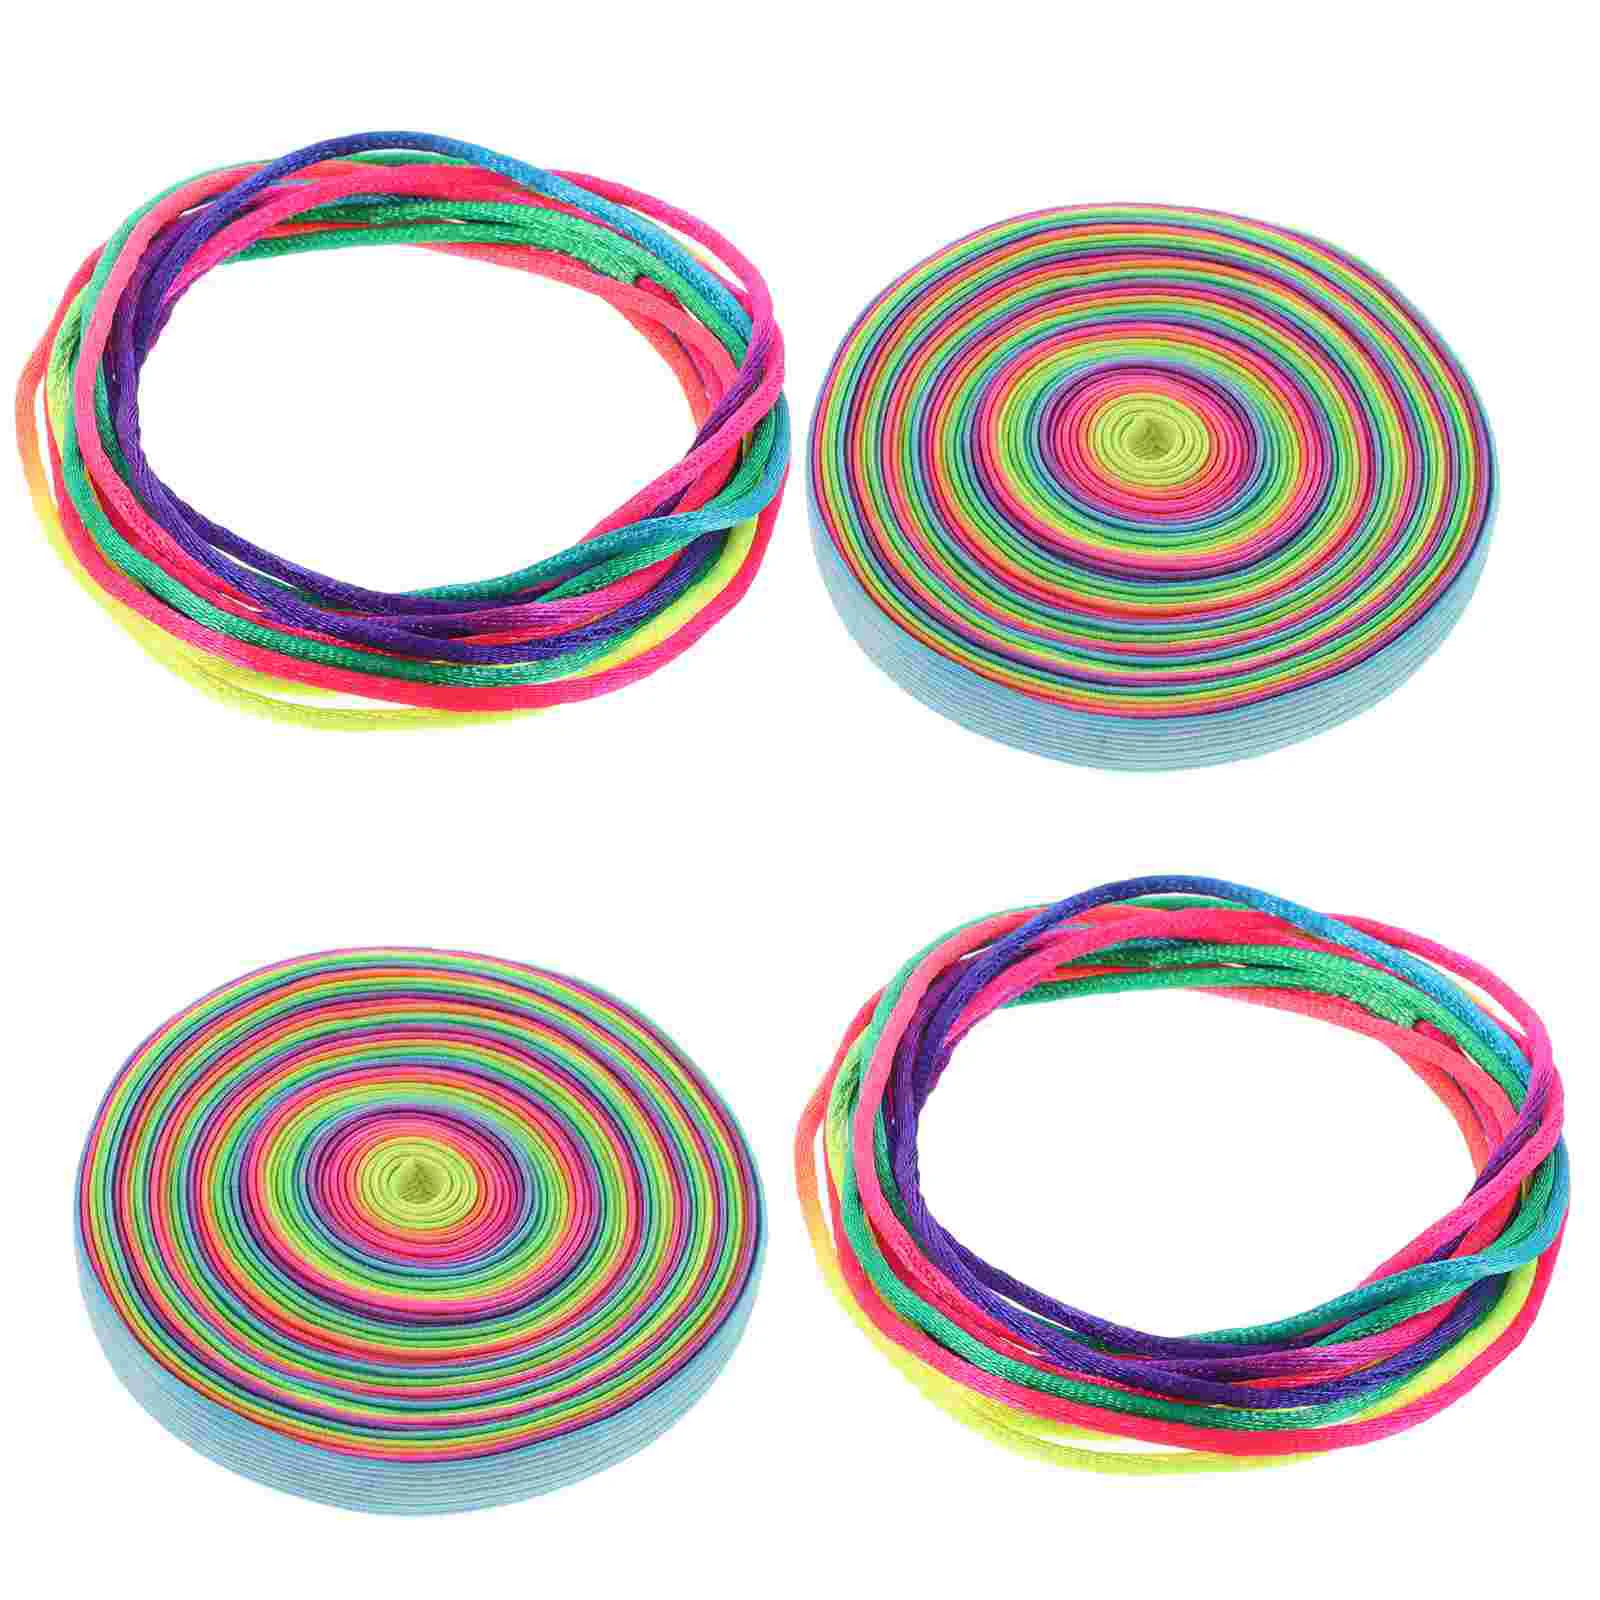 

4 Pcs Elastic Jumping Rubber Band Exercise Rope Adults Children Kids Outdoor Skipping Fitness Widen Ropes